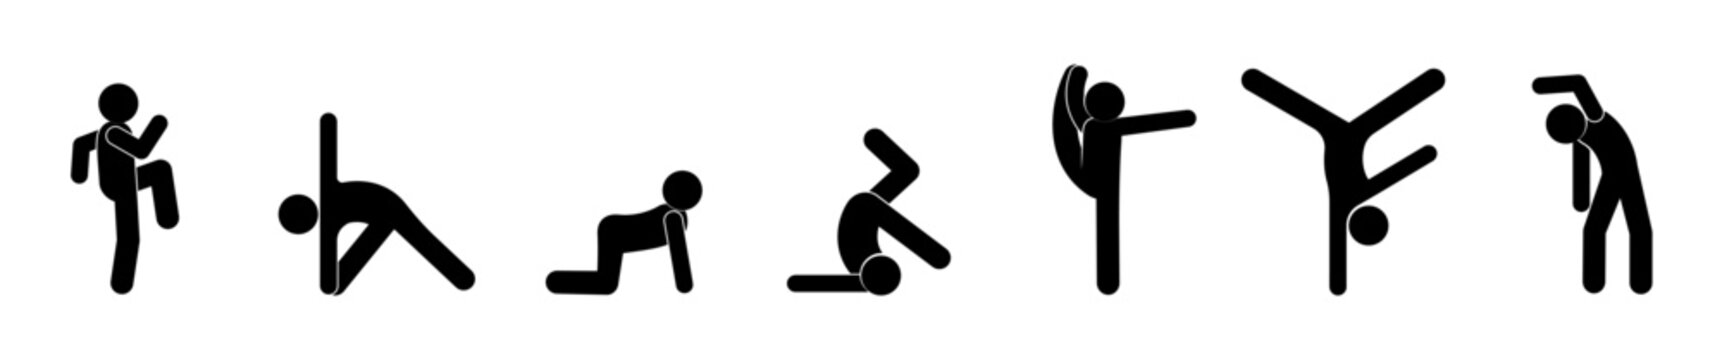 gymnast icon, exercise and pose illustration, stick figure man isolated silhouette